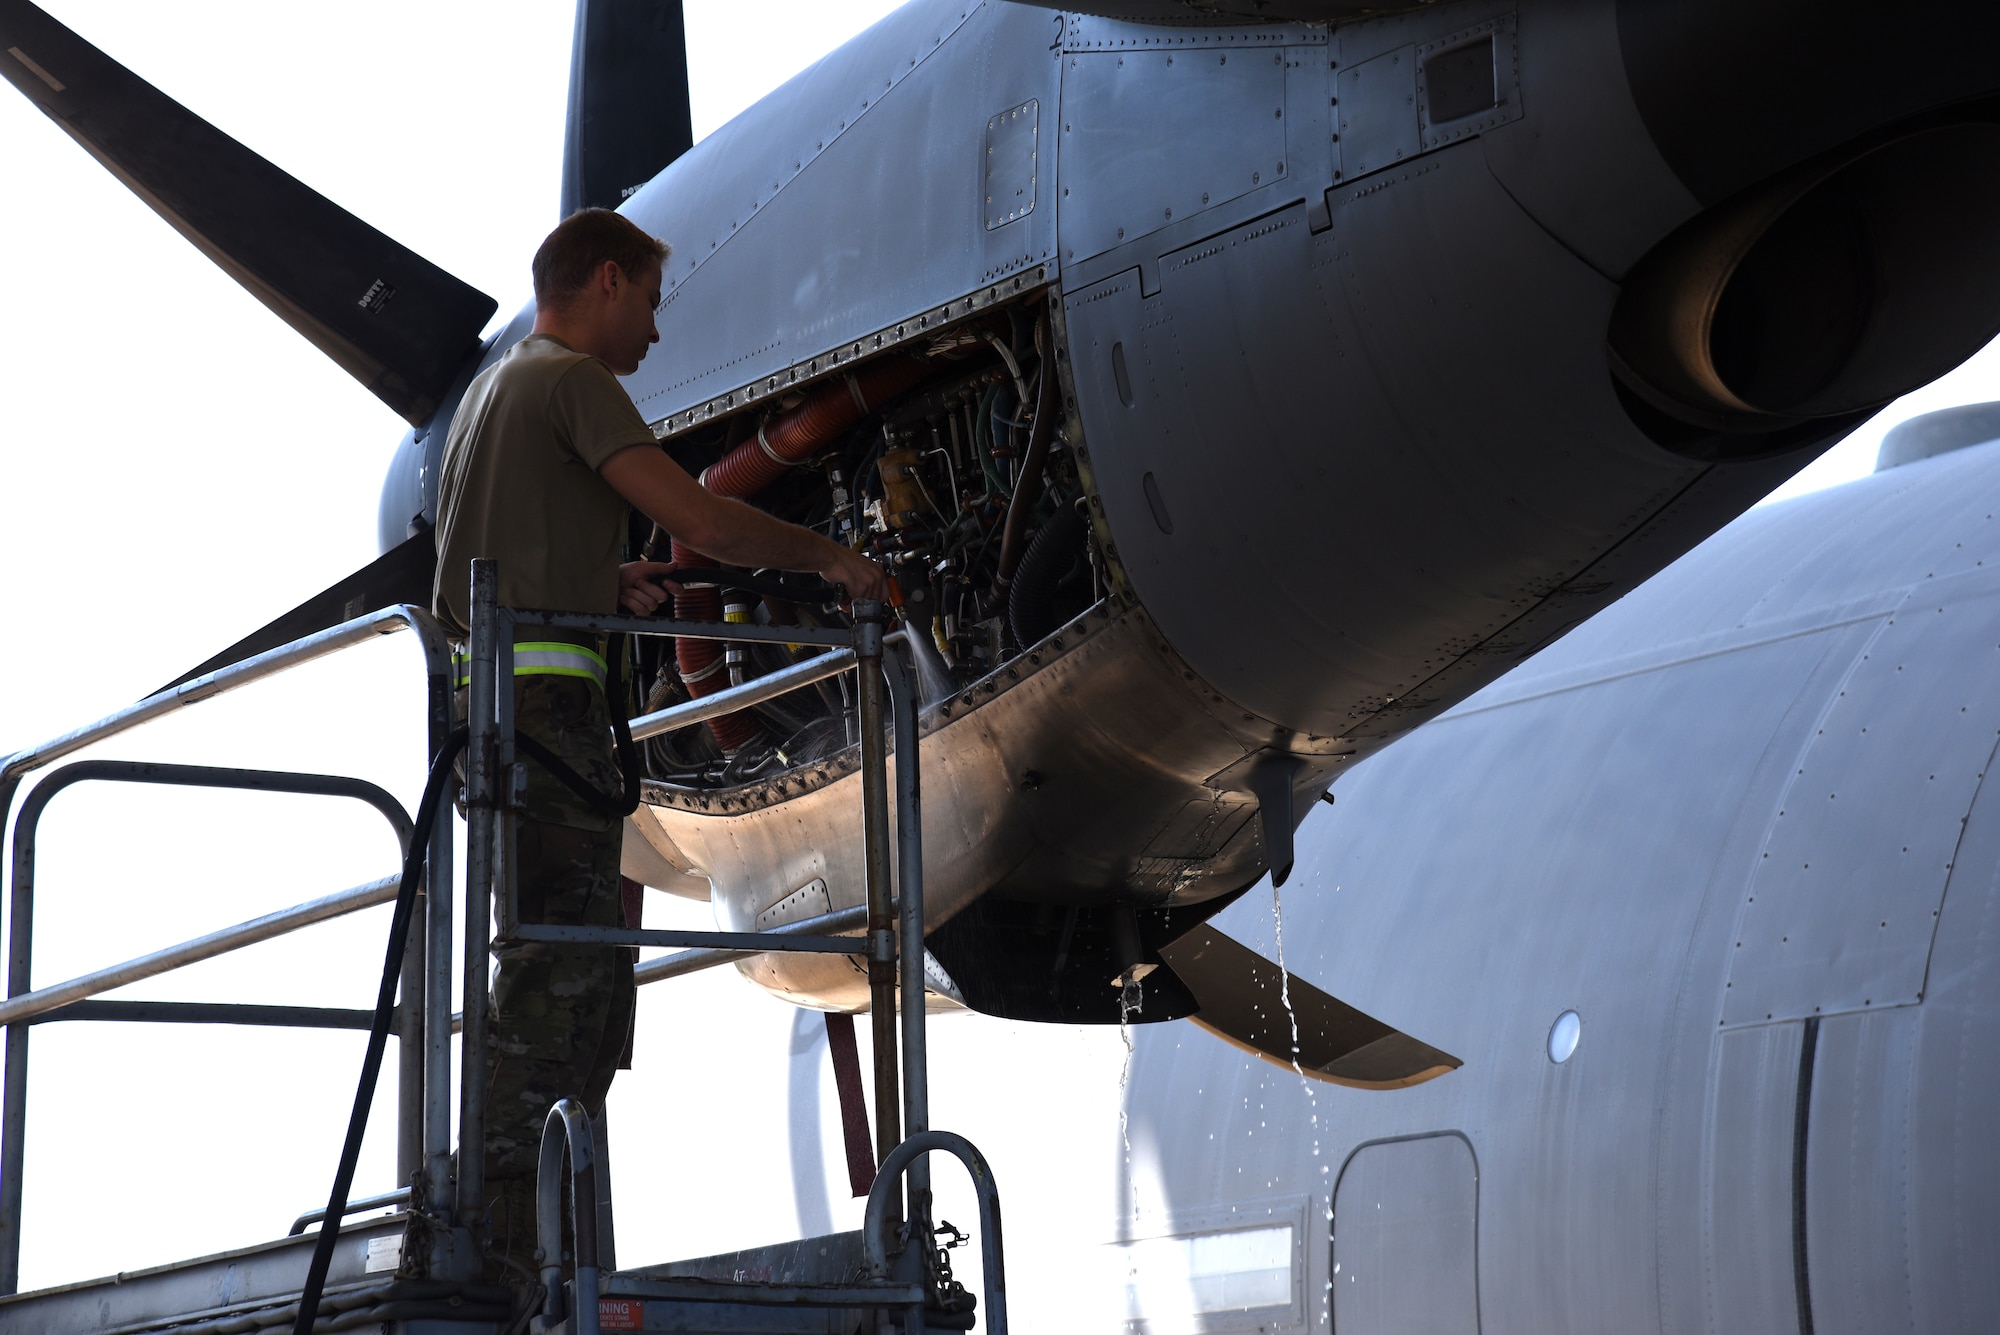 Senior Airman Jake Koltas, 403rd Maintenance Squadron propulsion technician, sprays the interior of the engine on an 815th Airlift Squadron C-130J Super Hercules removing excess dirt inside the engine compartment prior to completing an Engine Compressor Wash before the aircraft goes for a "C" letter inspection in the Isochronal Dock at Keesler Air Force Base, Mississippi May 11, 2020. These inspections or letter checks can range from "A" five days basic check, "B" 18 days and more in depth, to "C" 22 days which is the most intrusive inspection; but are necessary to keep the aircraft maintained. (U.S. Air Force photo by Jessica L. Kendziorek)